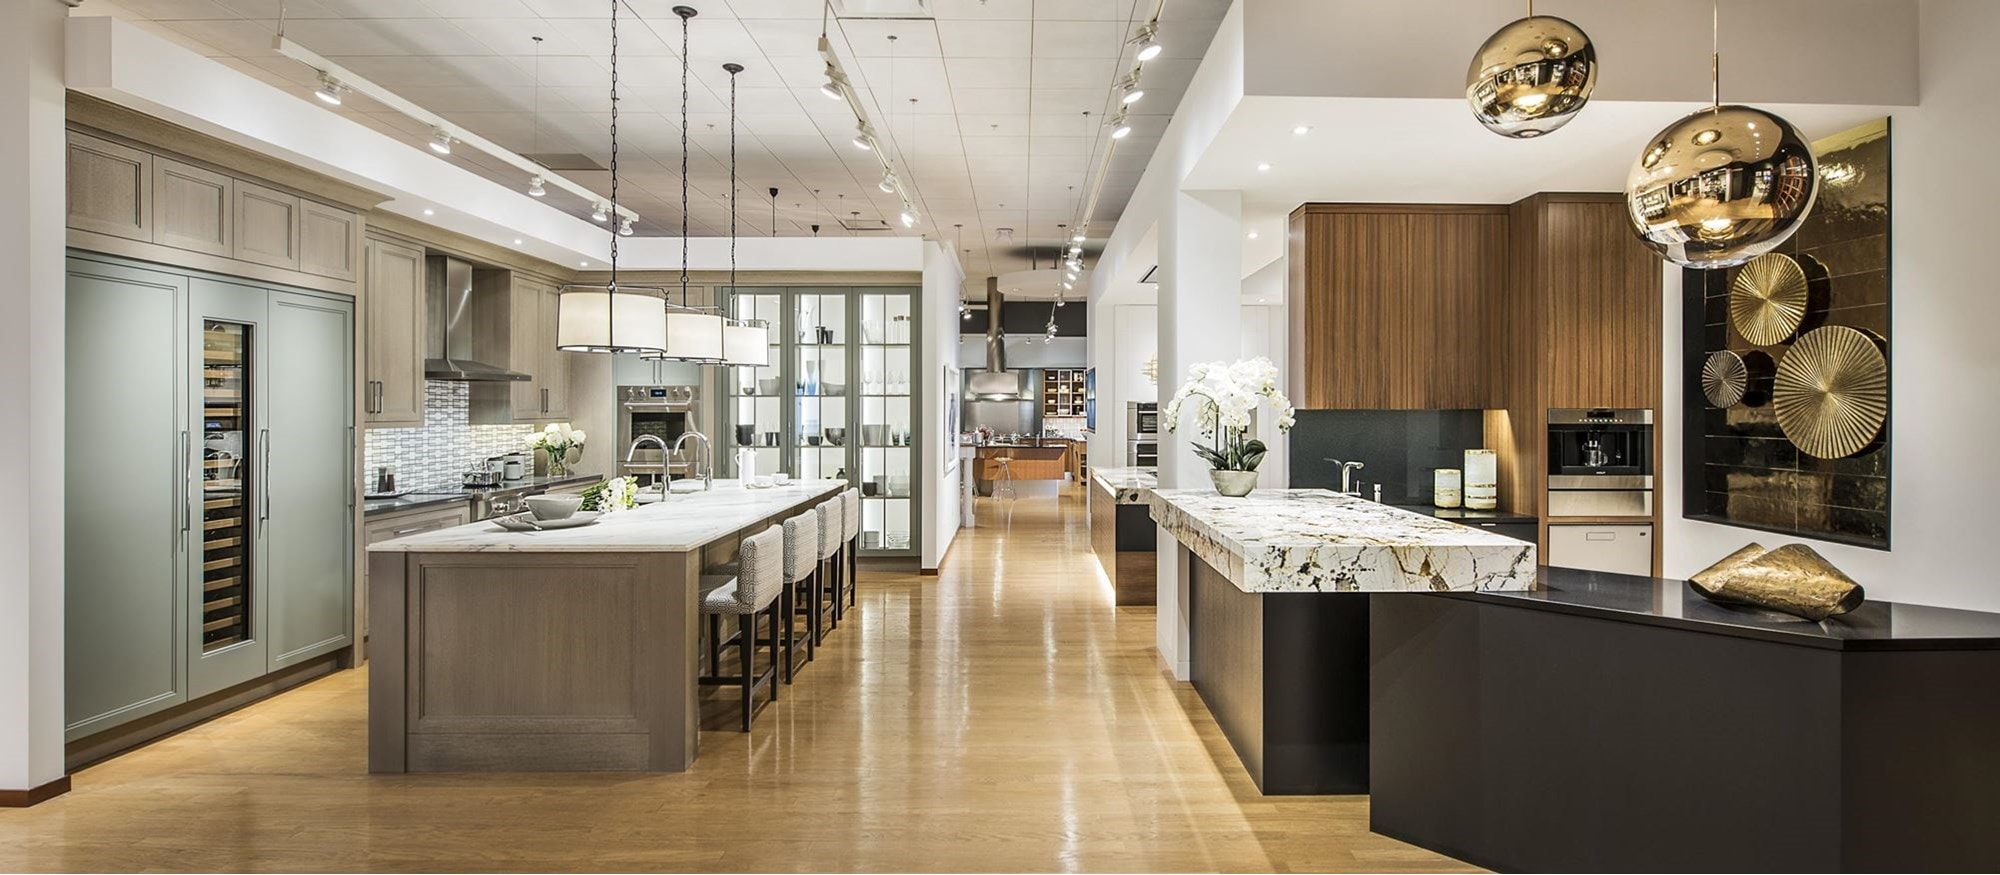 Explore ideas for your new kitchen at Sub-Zero, Wolf and Cove Showroom in Columbia, Maryland